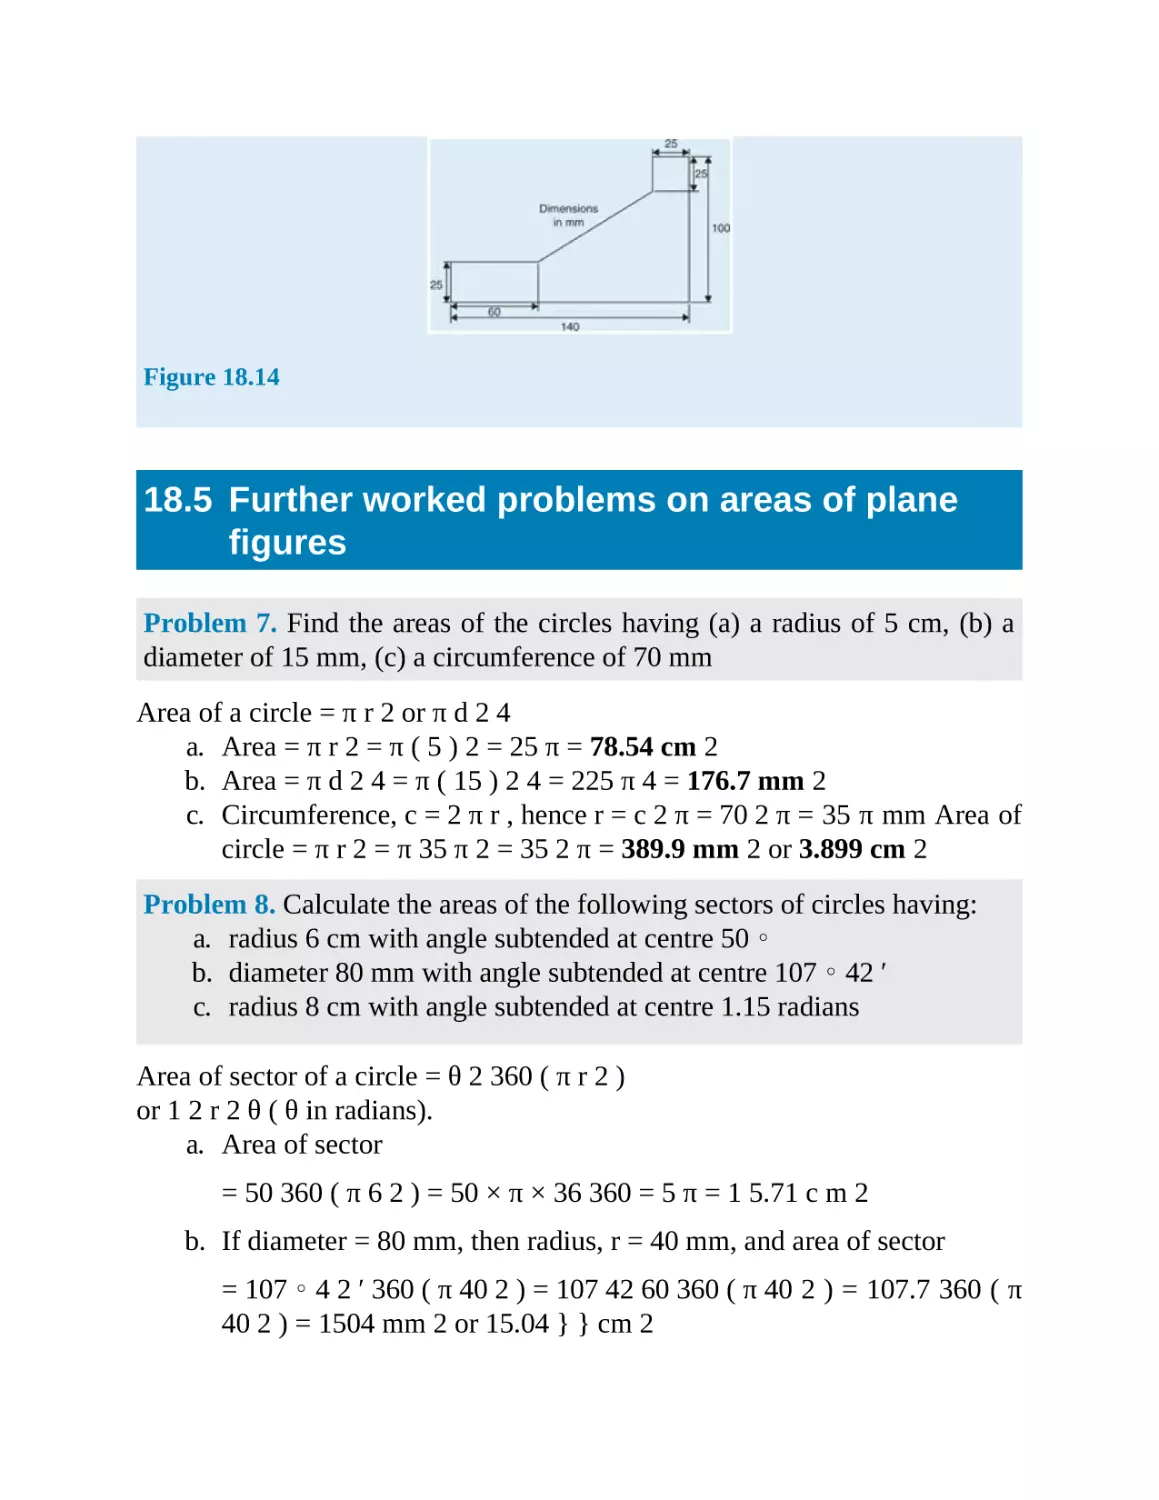 18.5 Further worked problems on areas of plane figures